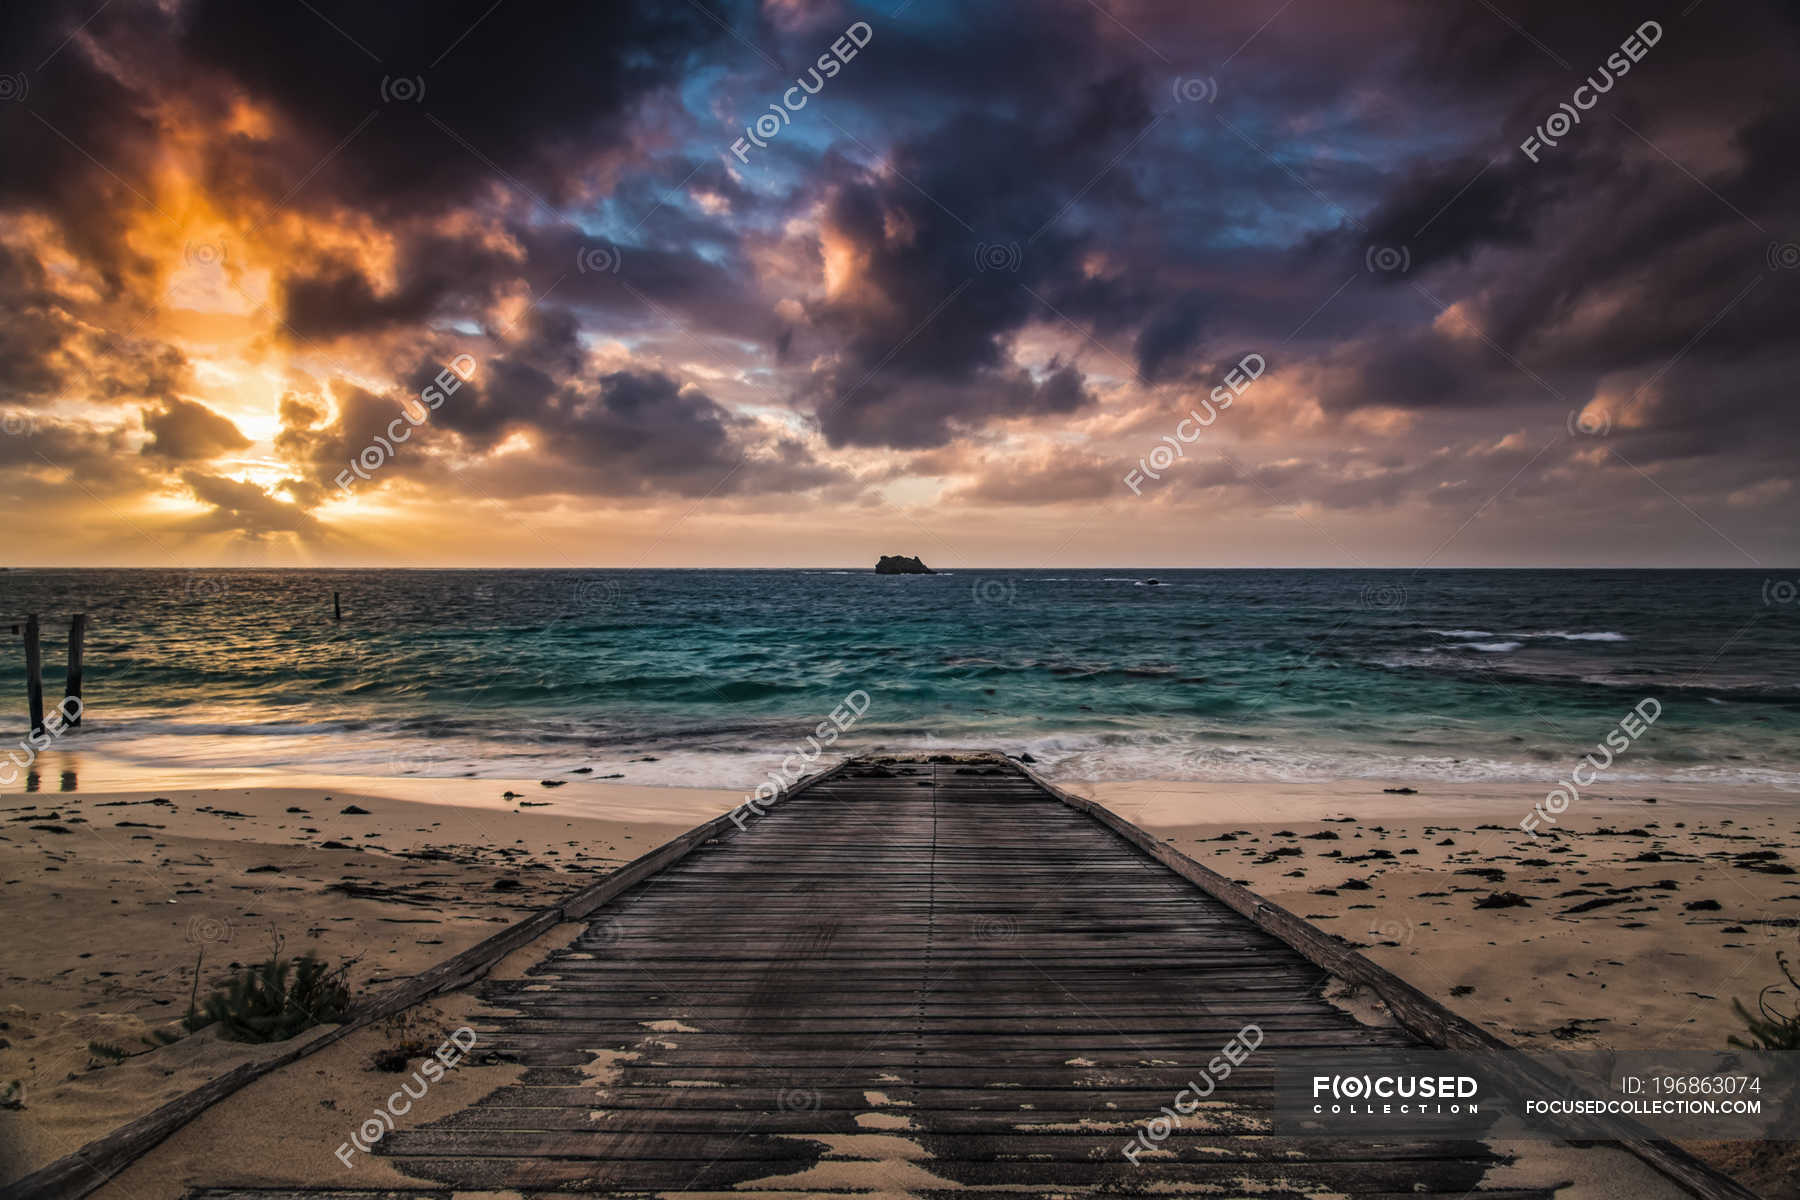 A wooden boardwalk on a beach leading to the turquoise water of Hamelin Bay  at sunset; Western Australia, Australia — backdrop, outdoor - Stock Photo |  #196863074